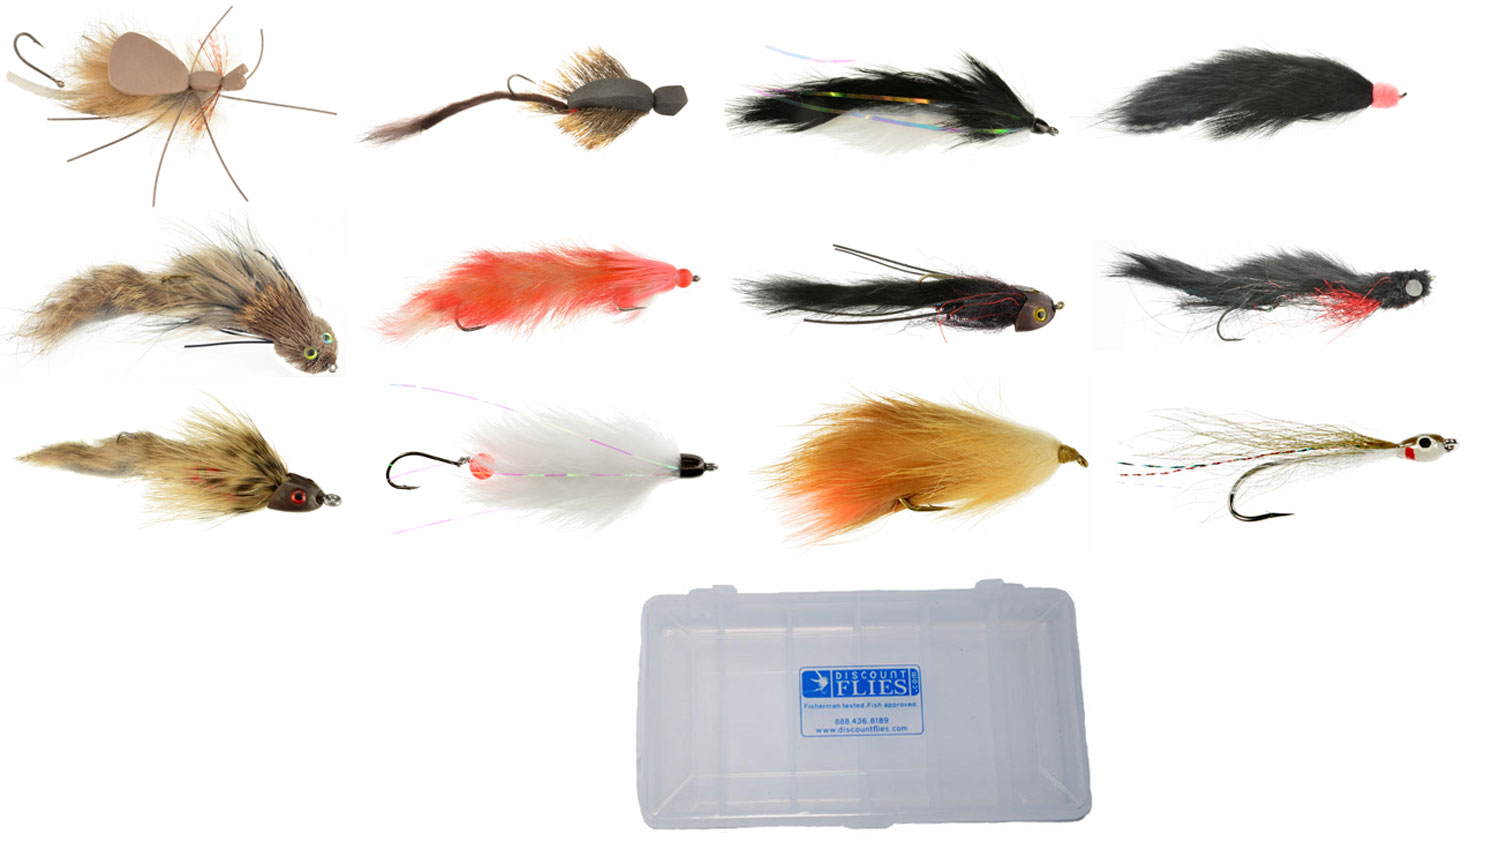 Big Trout Mouse & Streamer Fly Collection - 12 Flies + Fly Box